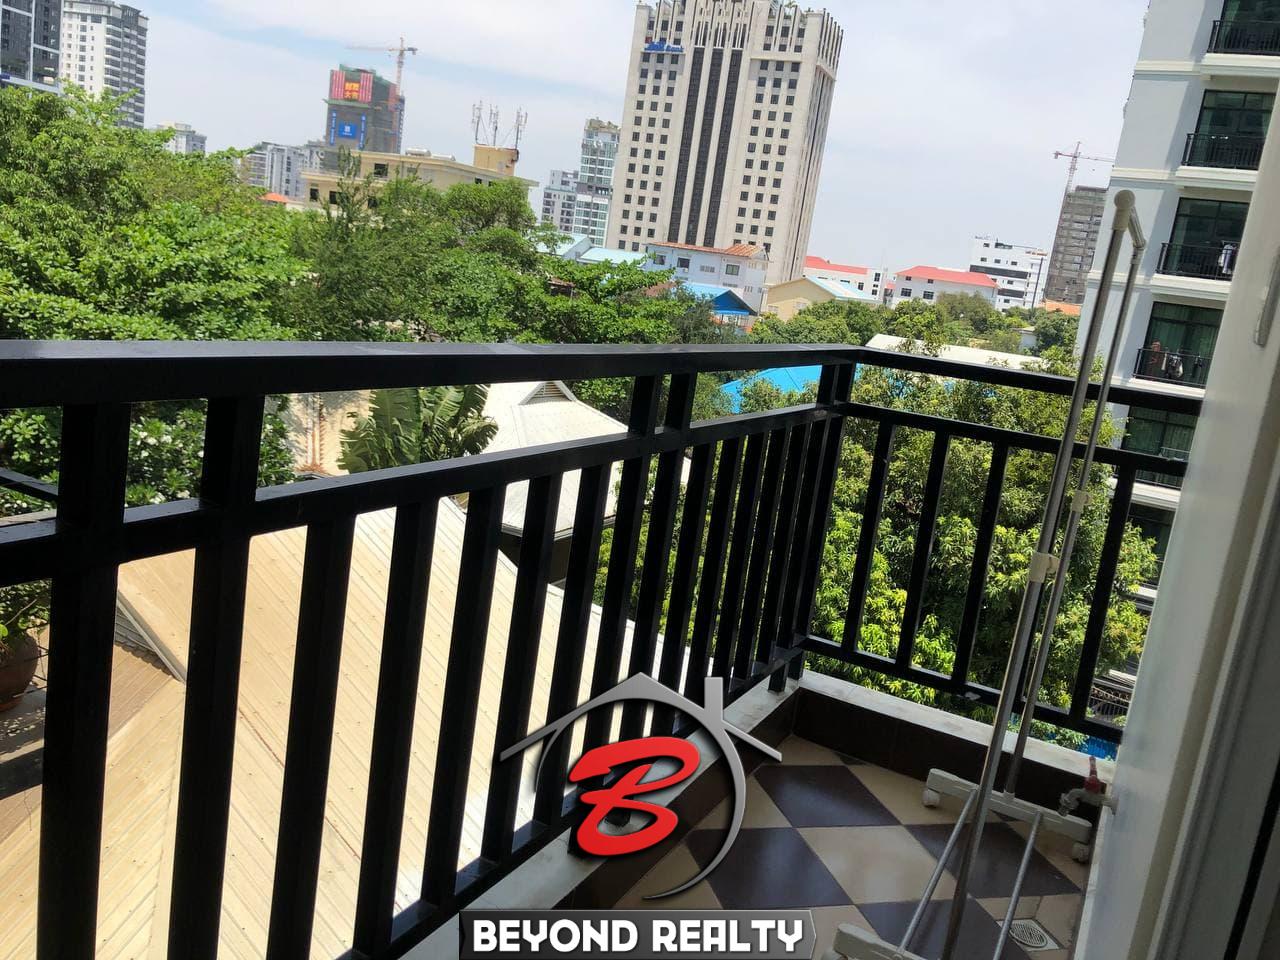 the balcony of the 1br apartment for rent in Tonle Bassac Phnom Penh Cambodia